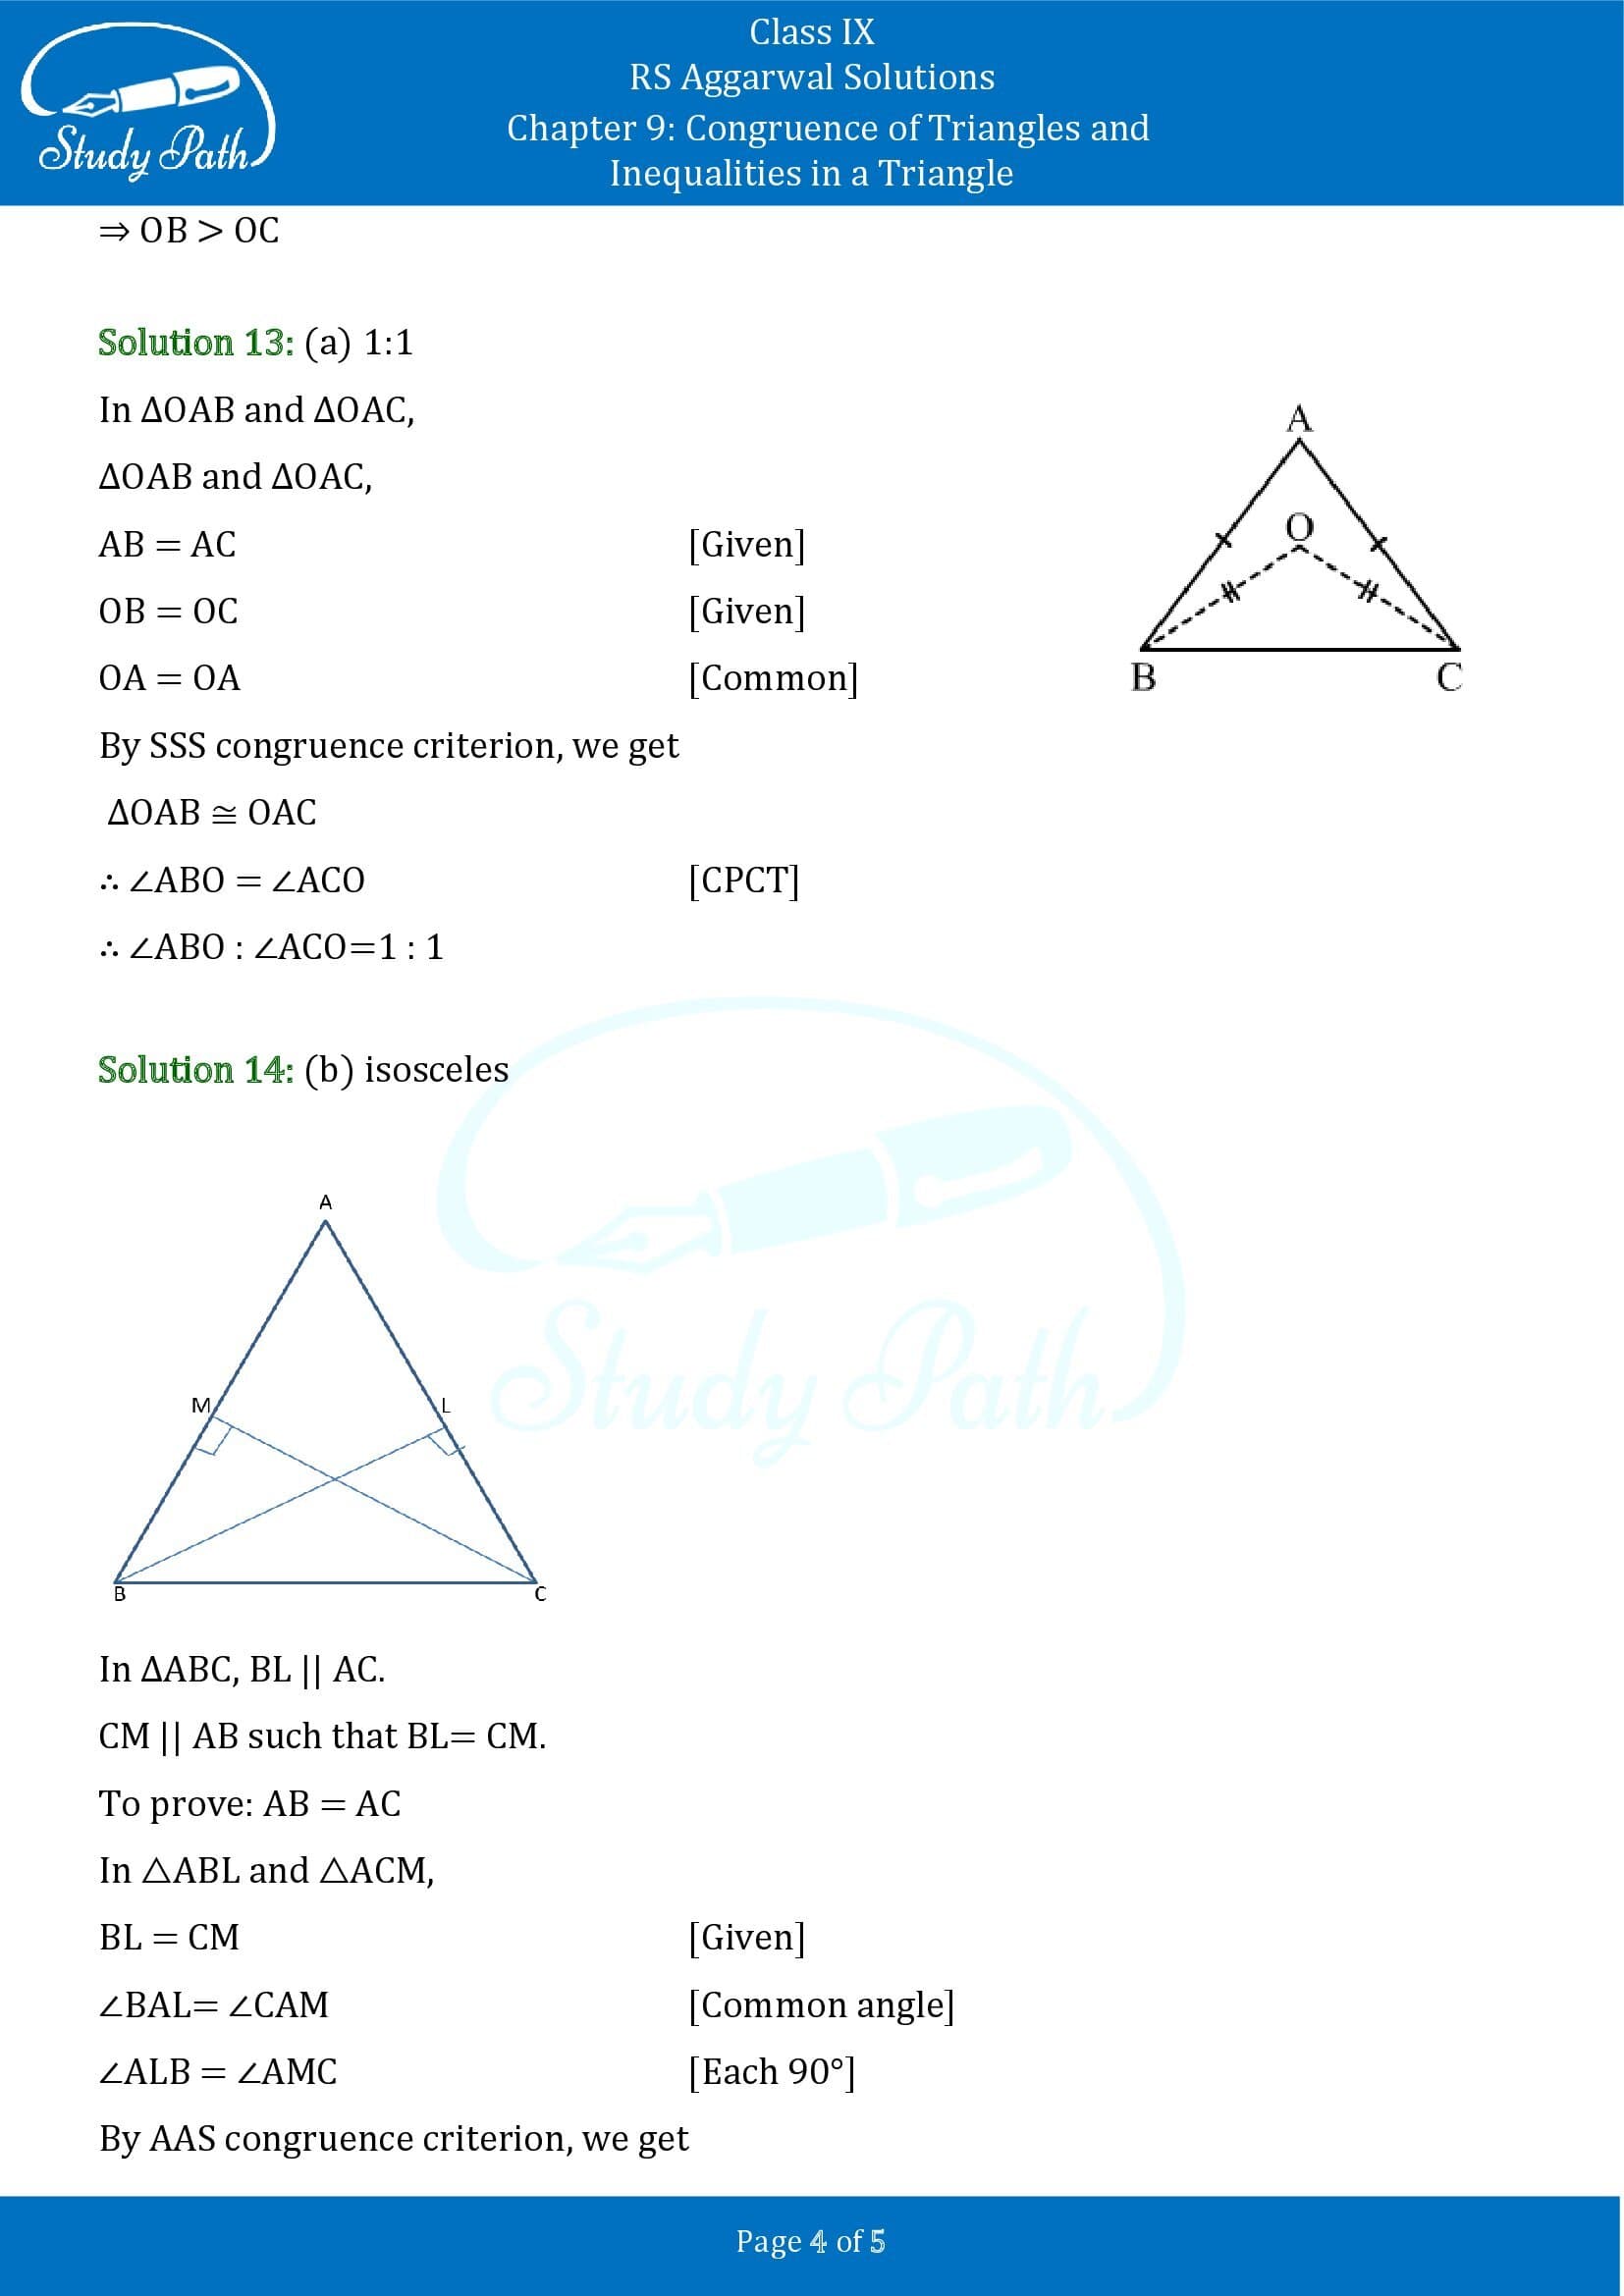 RS Aggarwal Solutions Class 9 Chapter 9 Congruence of Triangles and Inequalities in a Triangle Multiple Choice Questions MCQs 00004